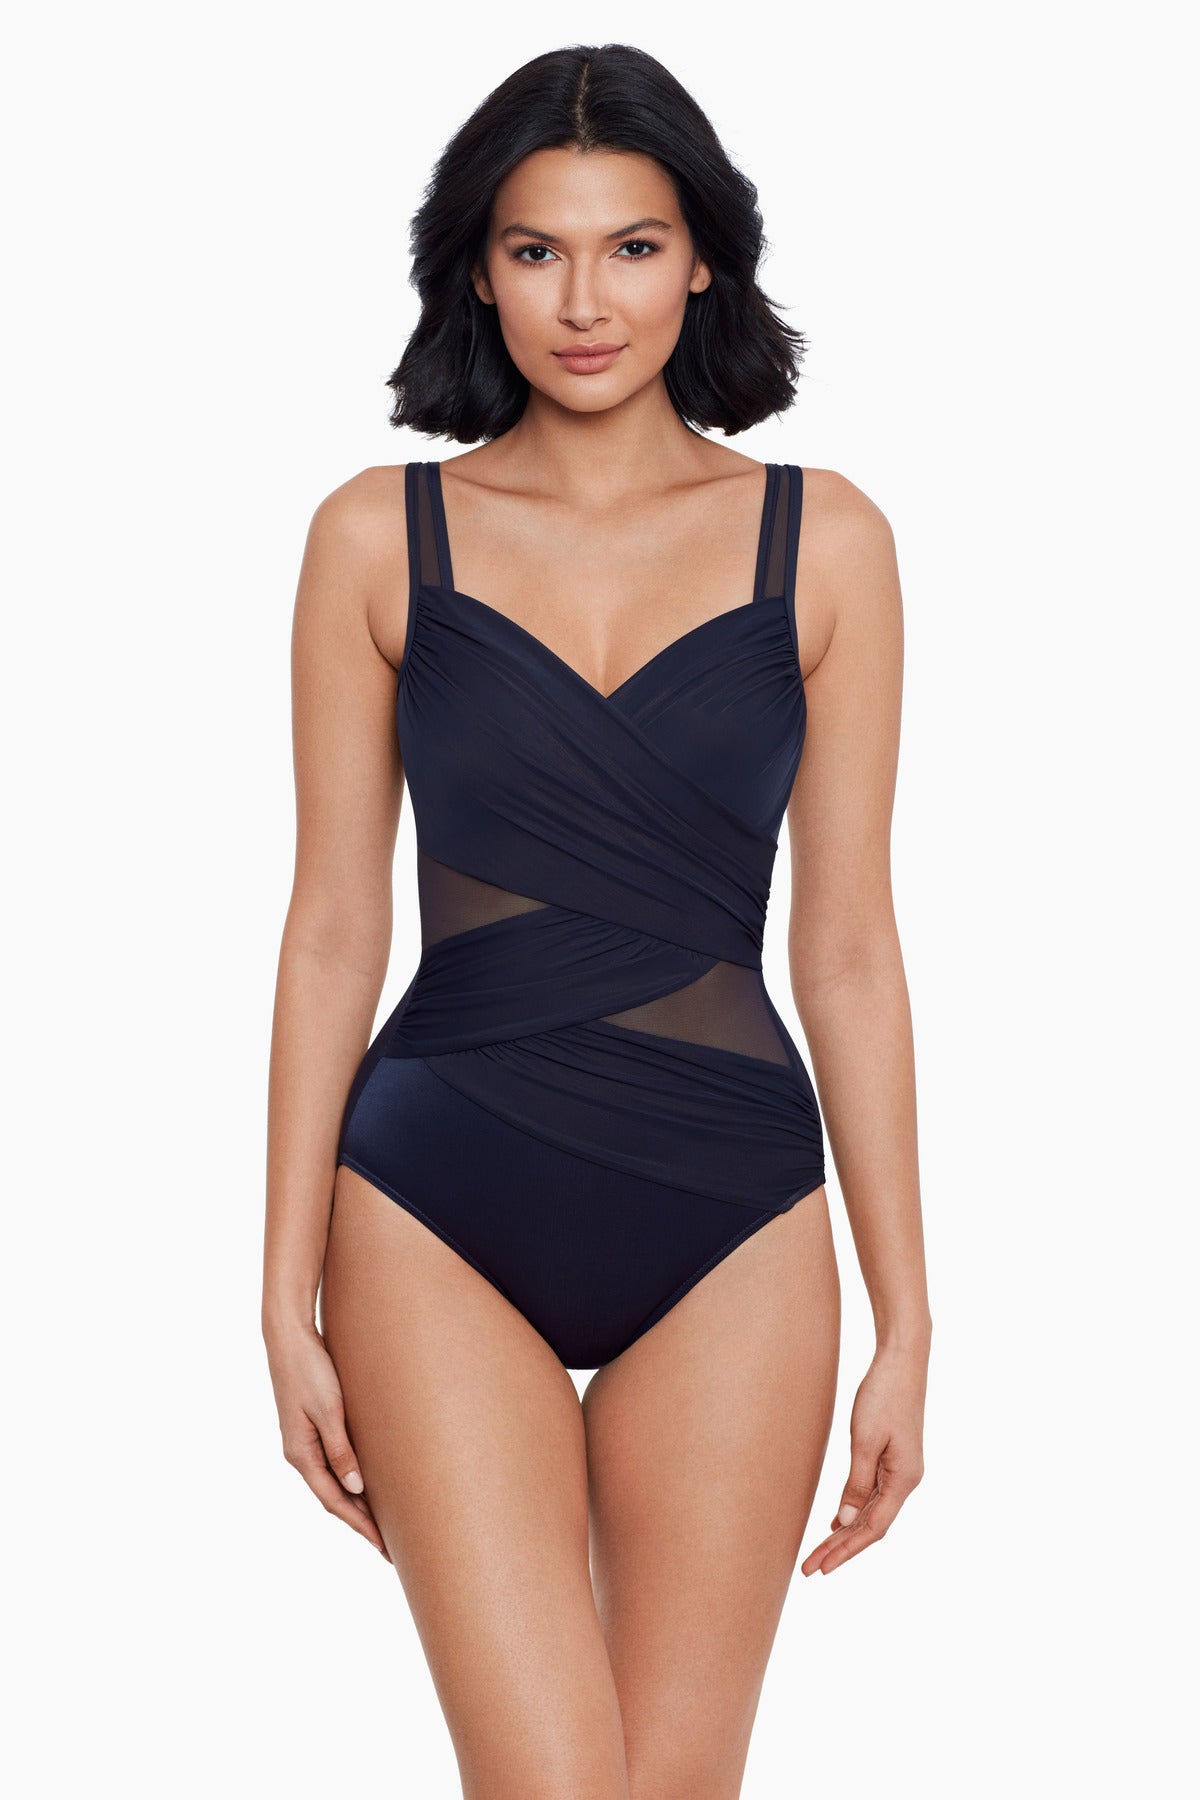 Miraclesuit New Sensations Madero One Piece Swimsuit DD-Cup